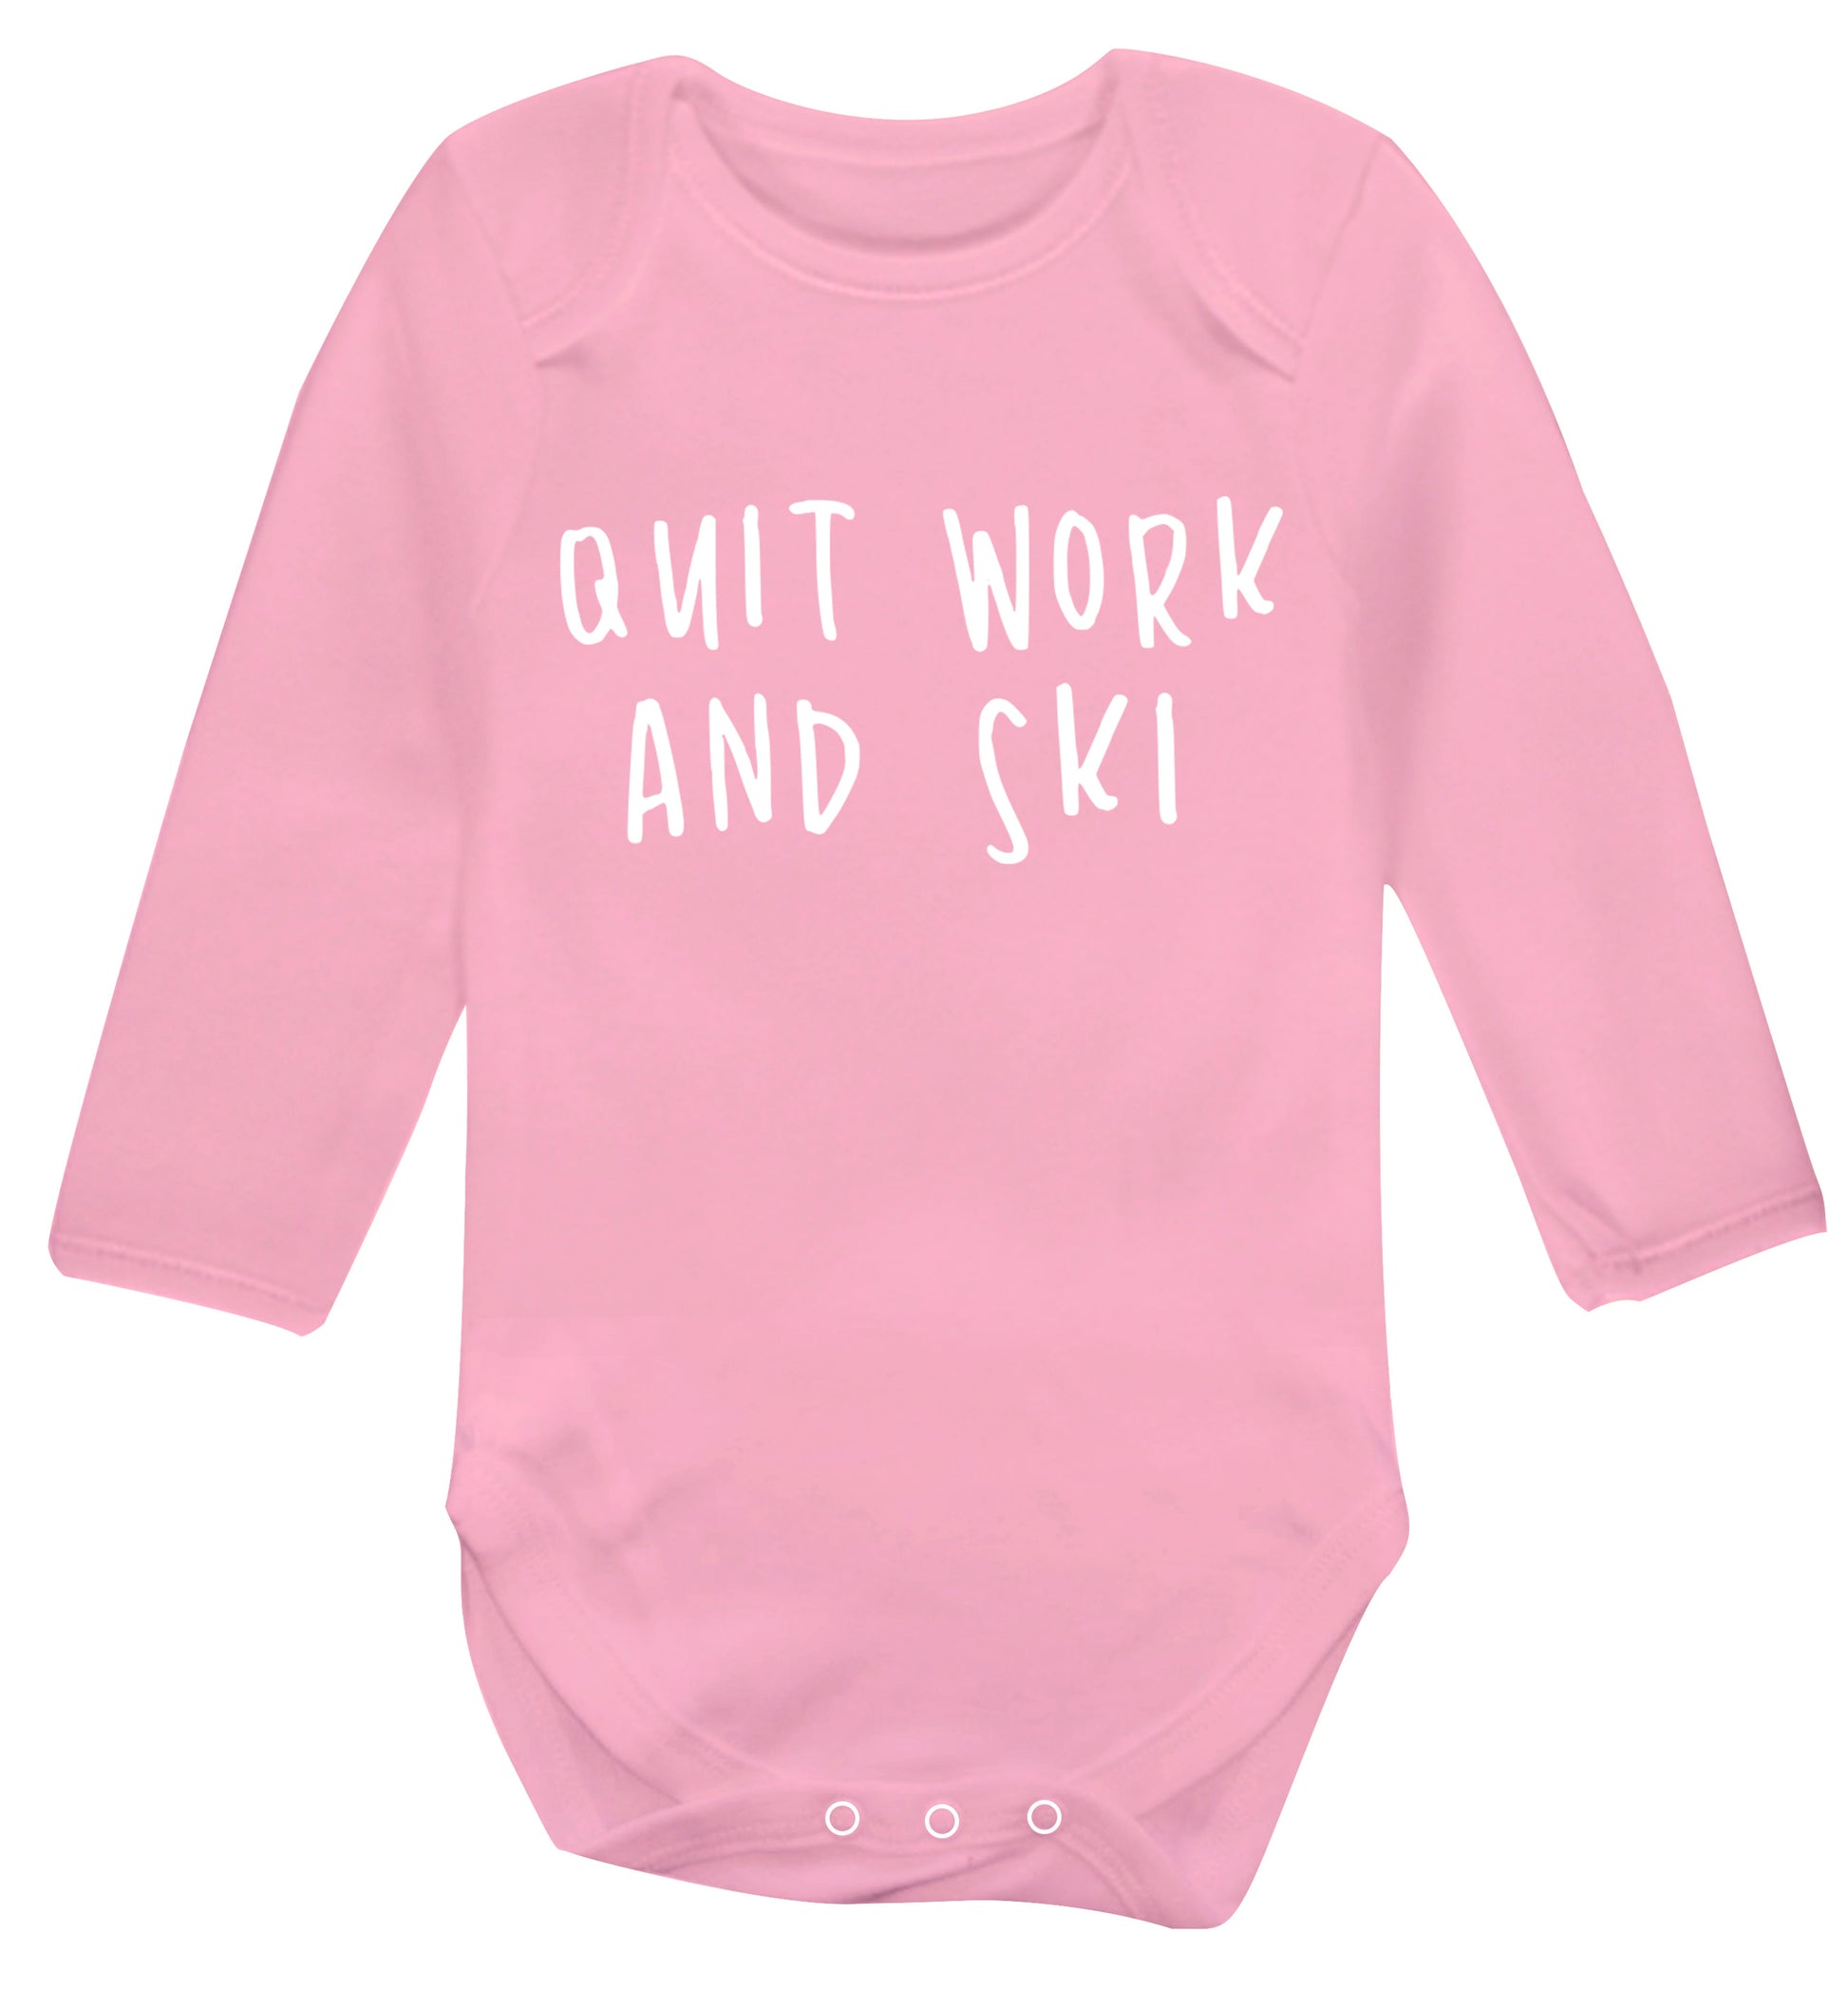 Quit work and ski Baby Vest long sleeved pale pink 6-12 months